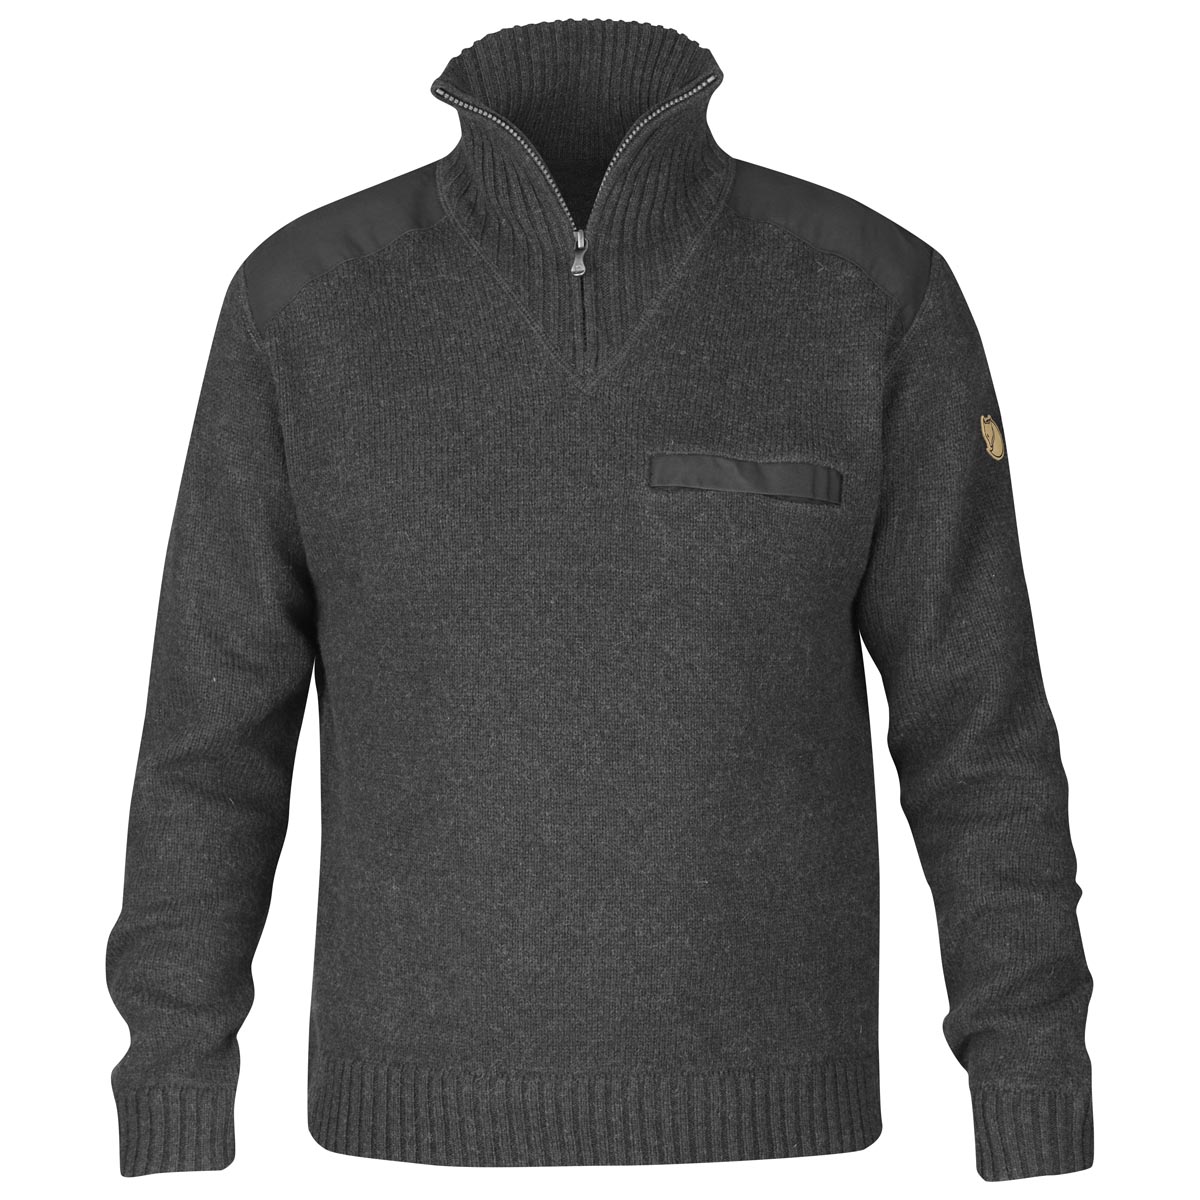 Fjall Raven Koster Sweater